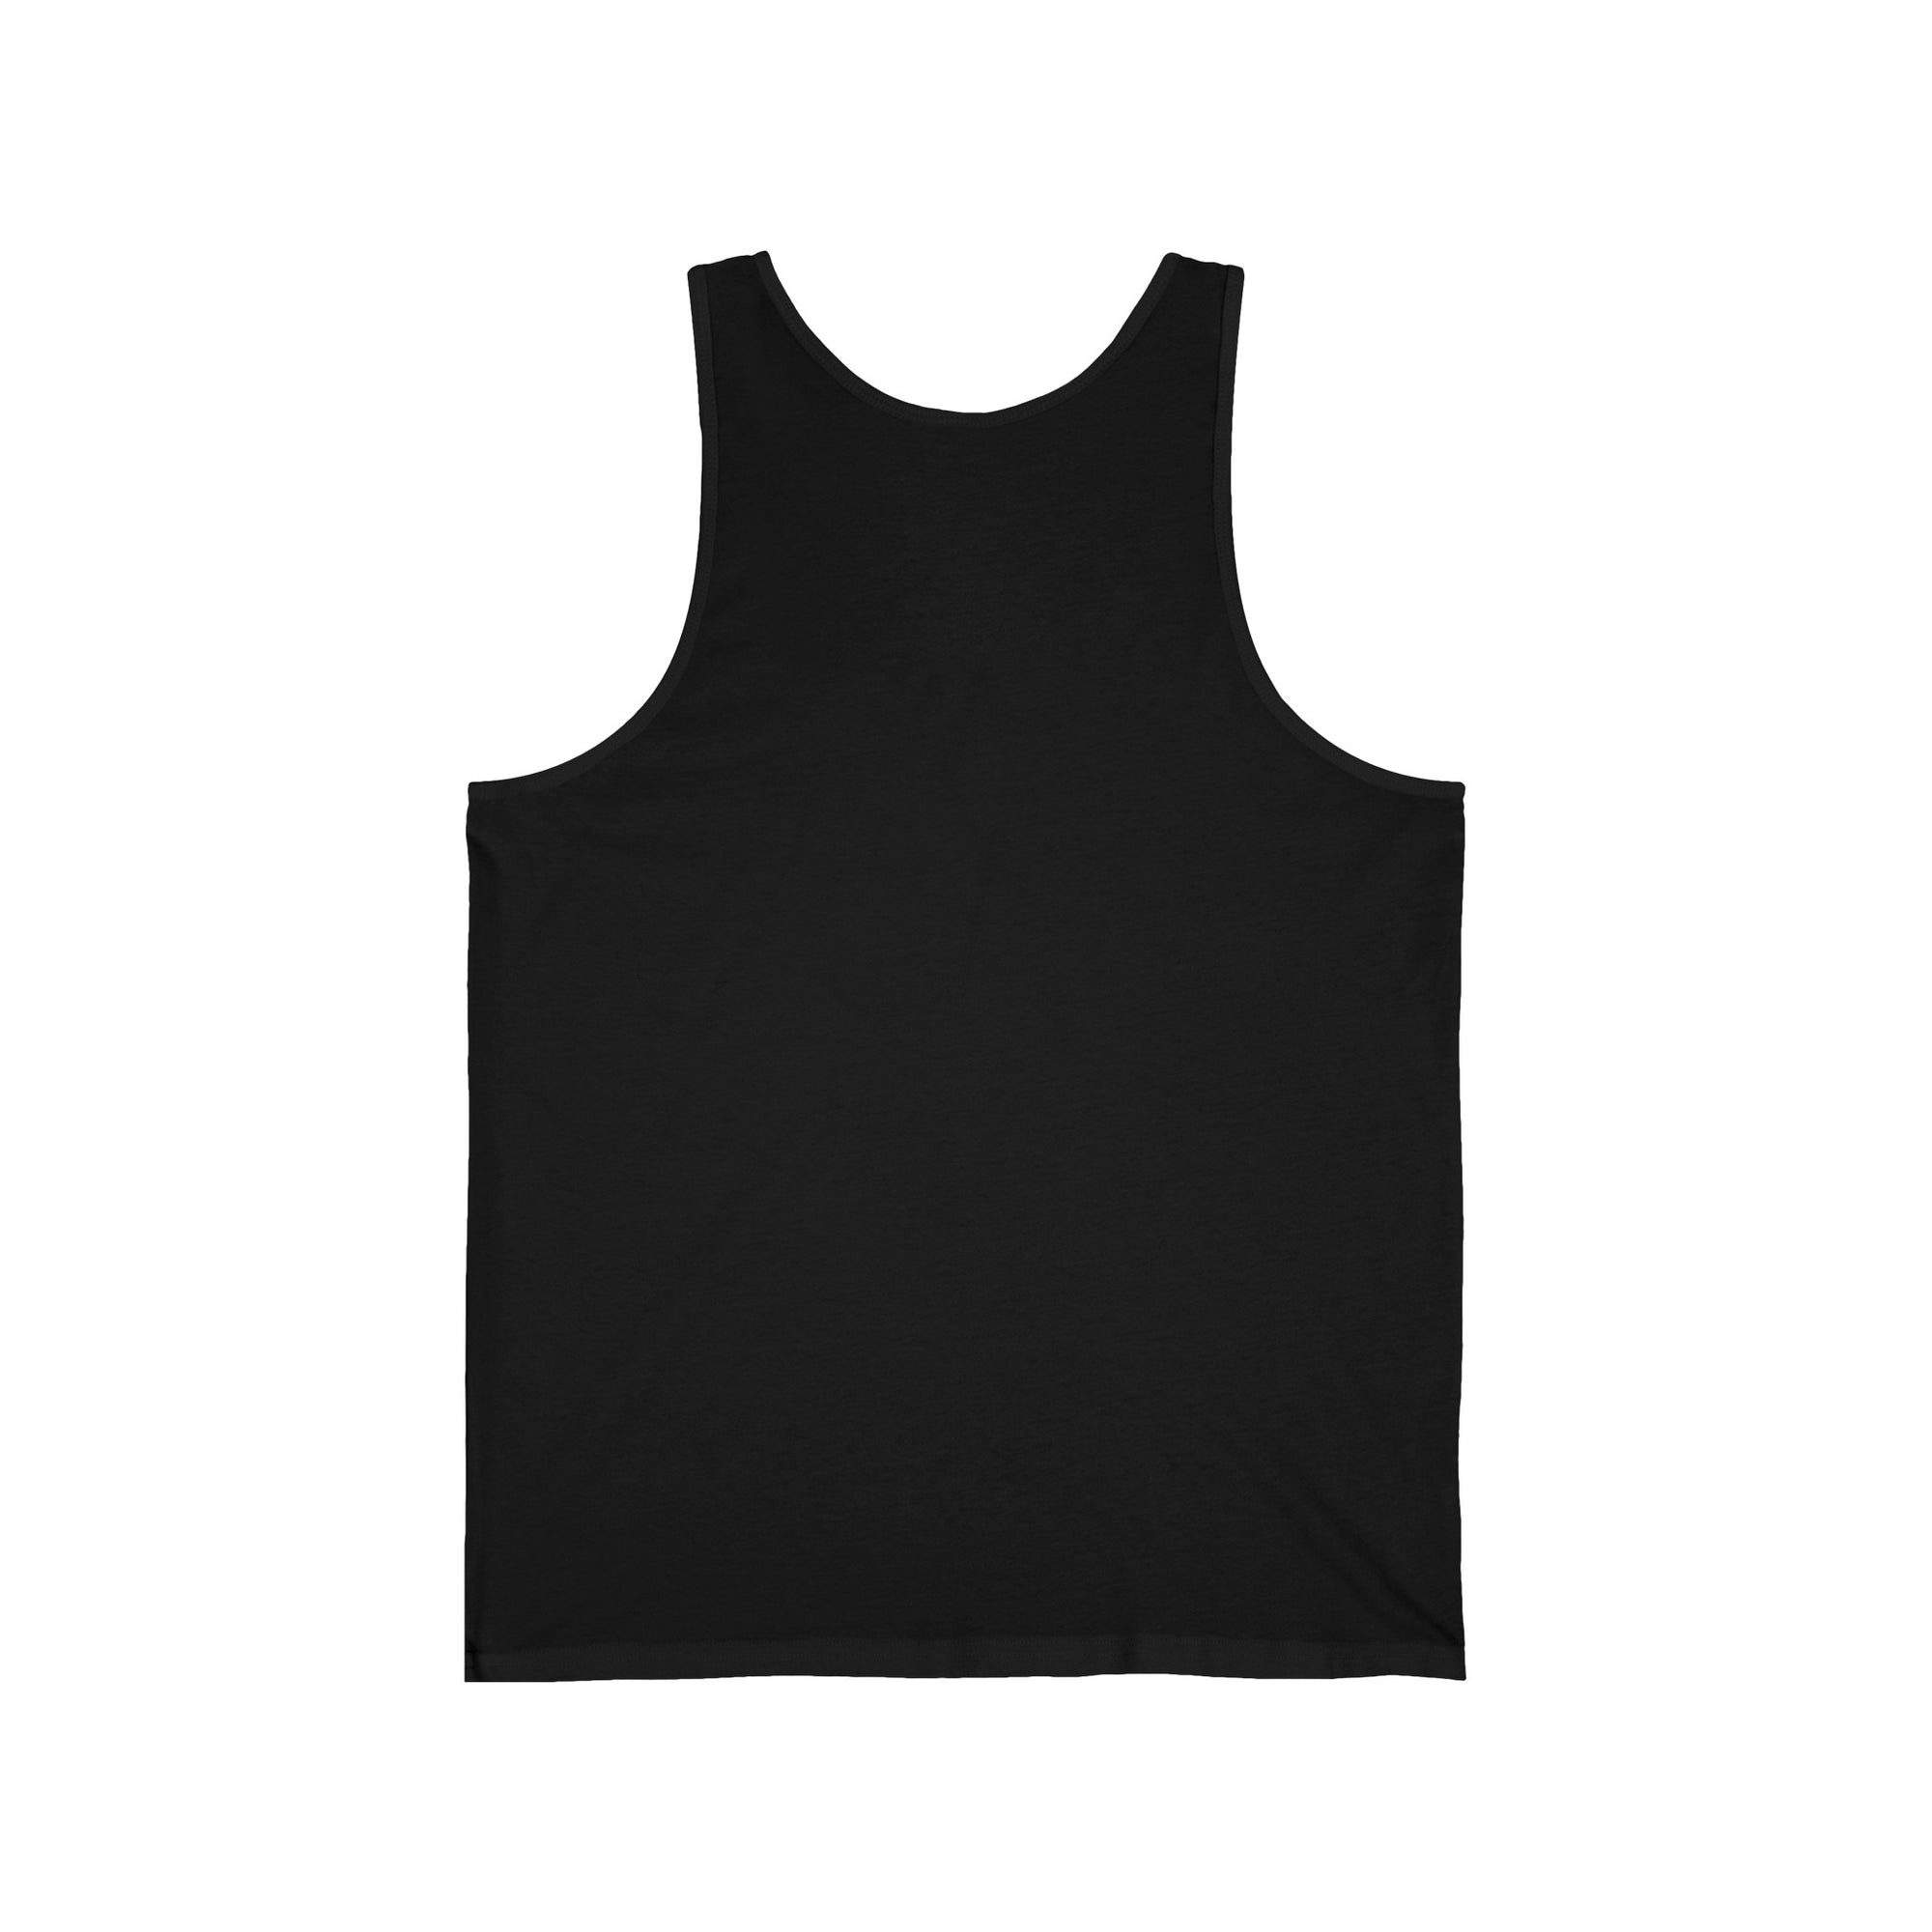 Cube - Norse Foundry Men's Tank Top